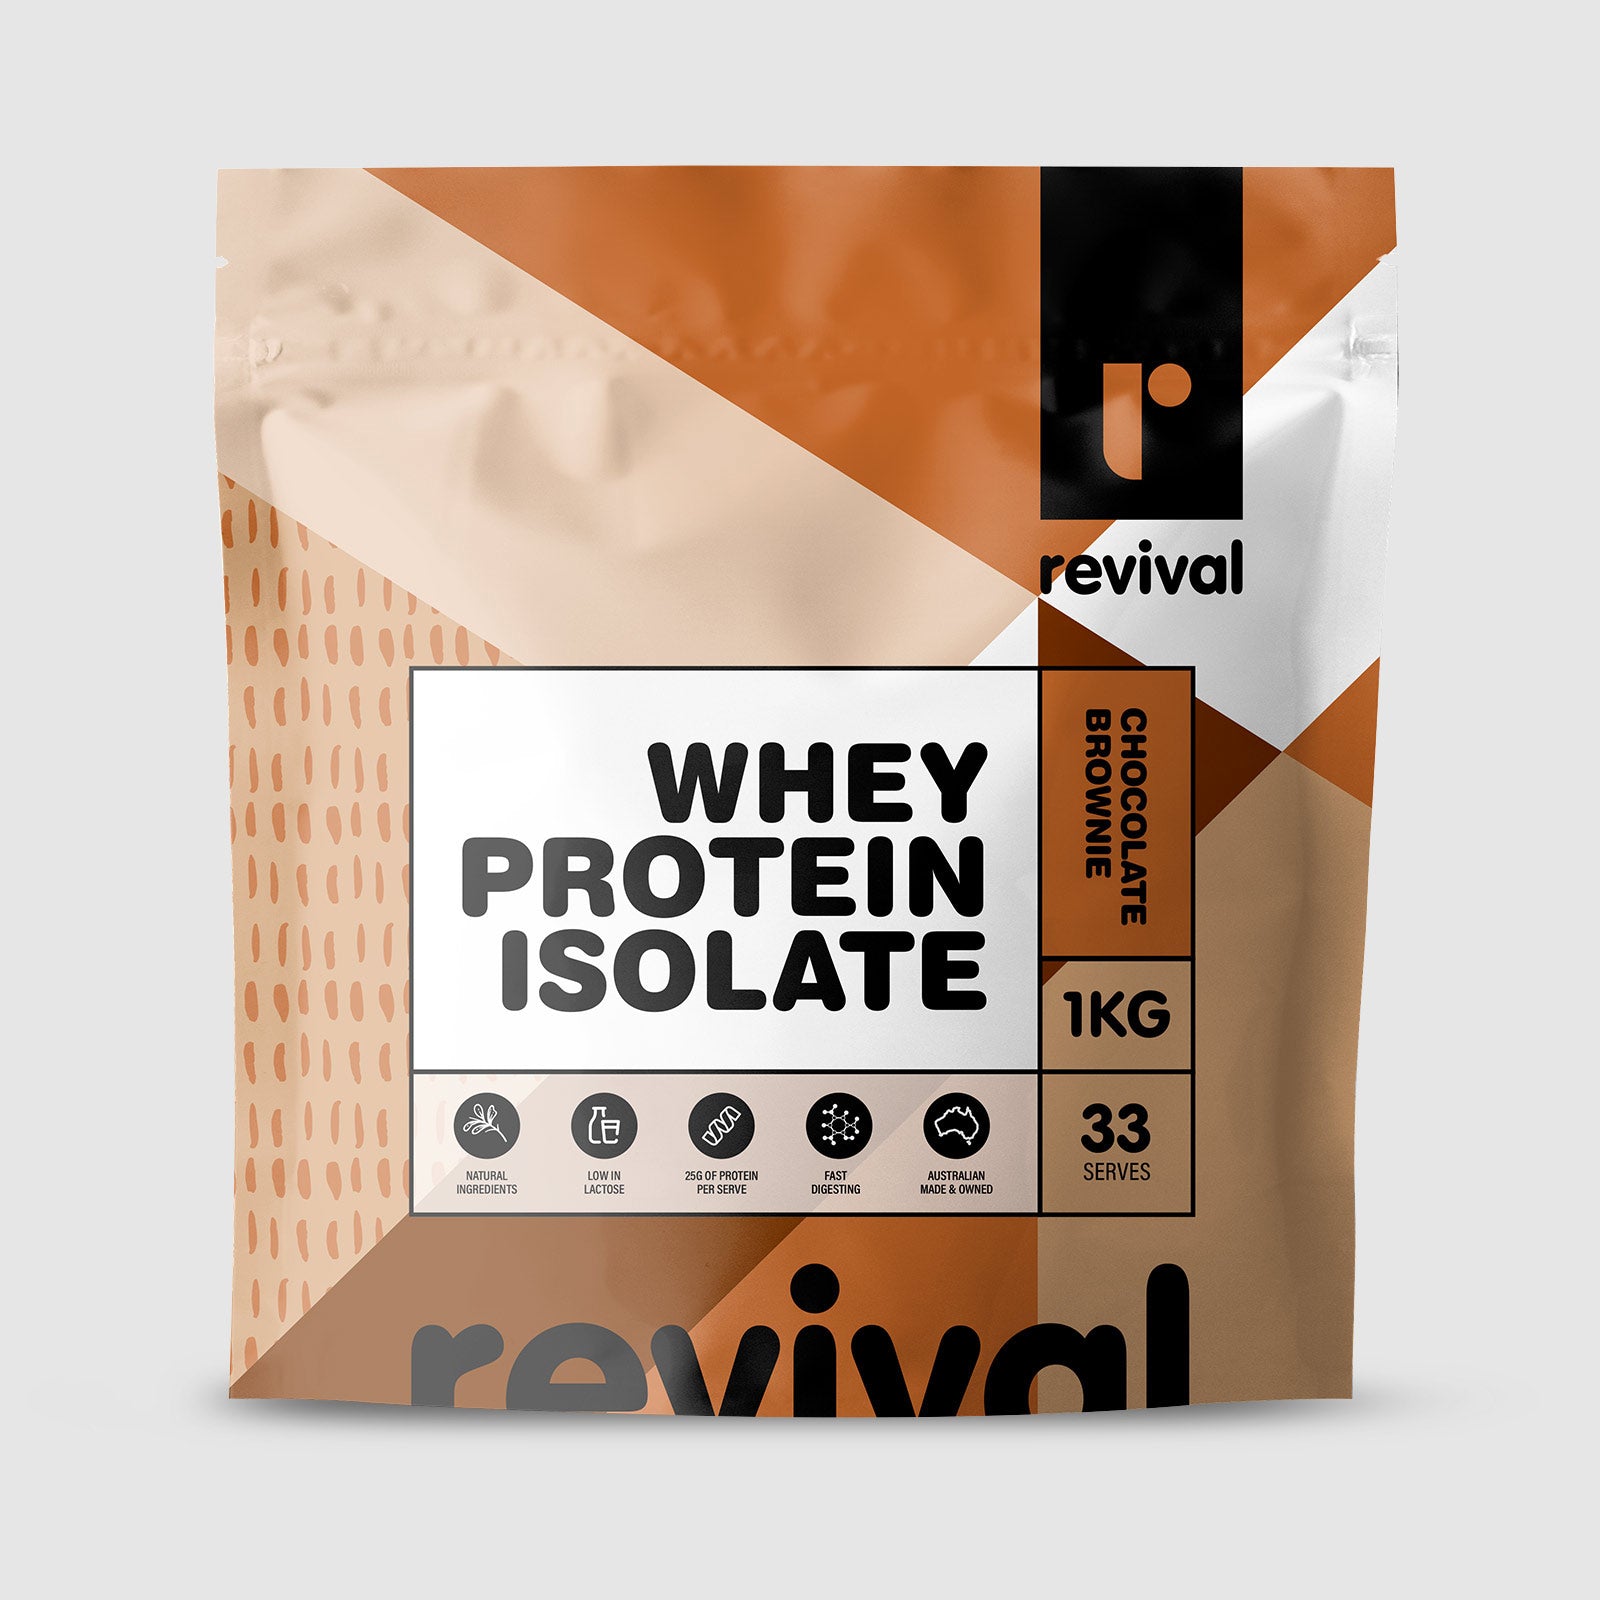 Revival - Whey Protein Isolate - 1kg